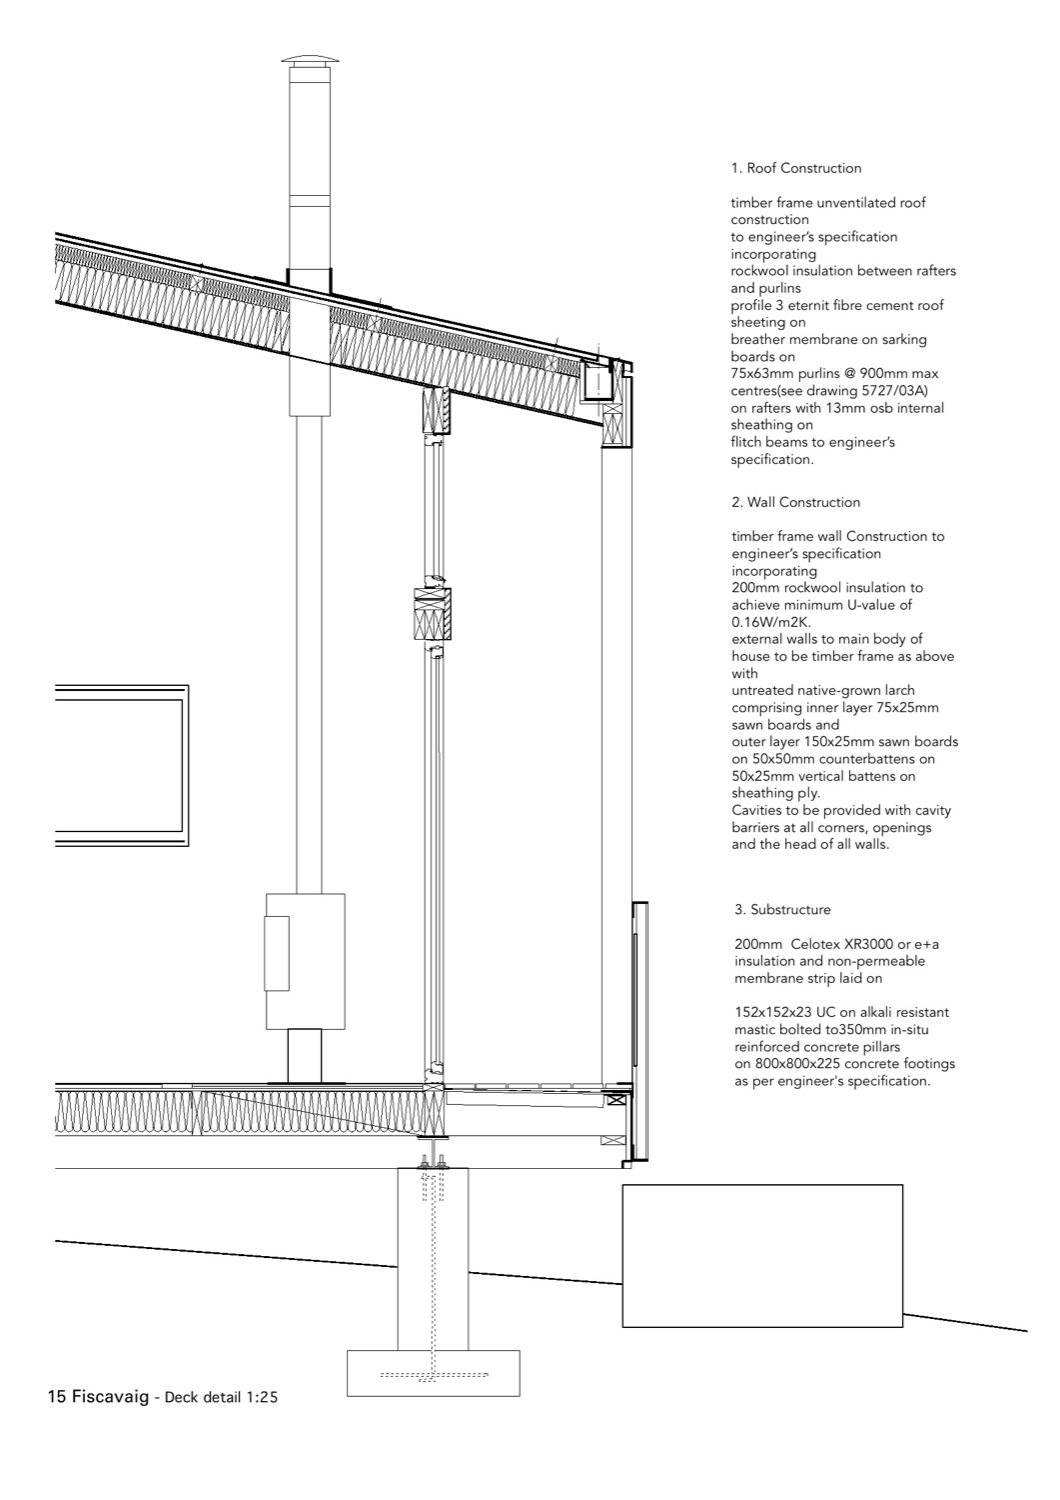 http://www.archdaily.com/wp-content/uploads/2009/11/1259262672-detailed-section.jpeg